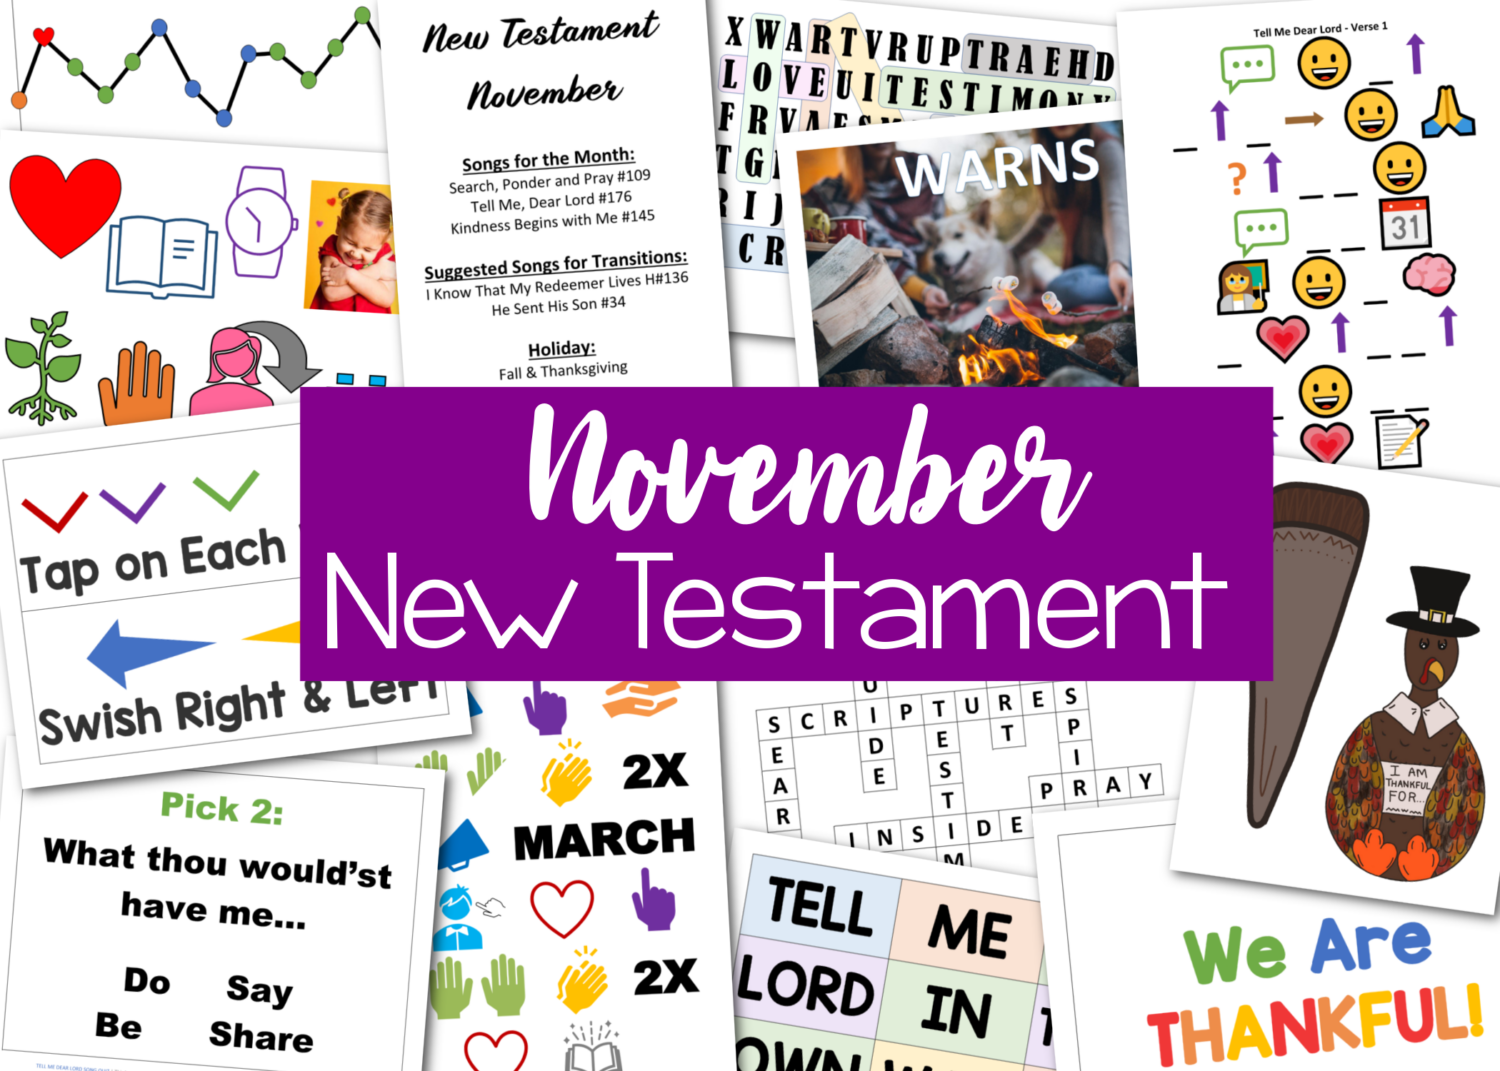 New Testament November Singing Time Ideas primary song list activities to help you teach Search Ponder and Pray, Tell Me Dear Lord, and Kindness Begins with Me, plus fun Thanksgiving Singing Time ideas! There's a wide variety of teaching ideas and printable helps here in this one go-to packet for LDS Primary music leaders and families.